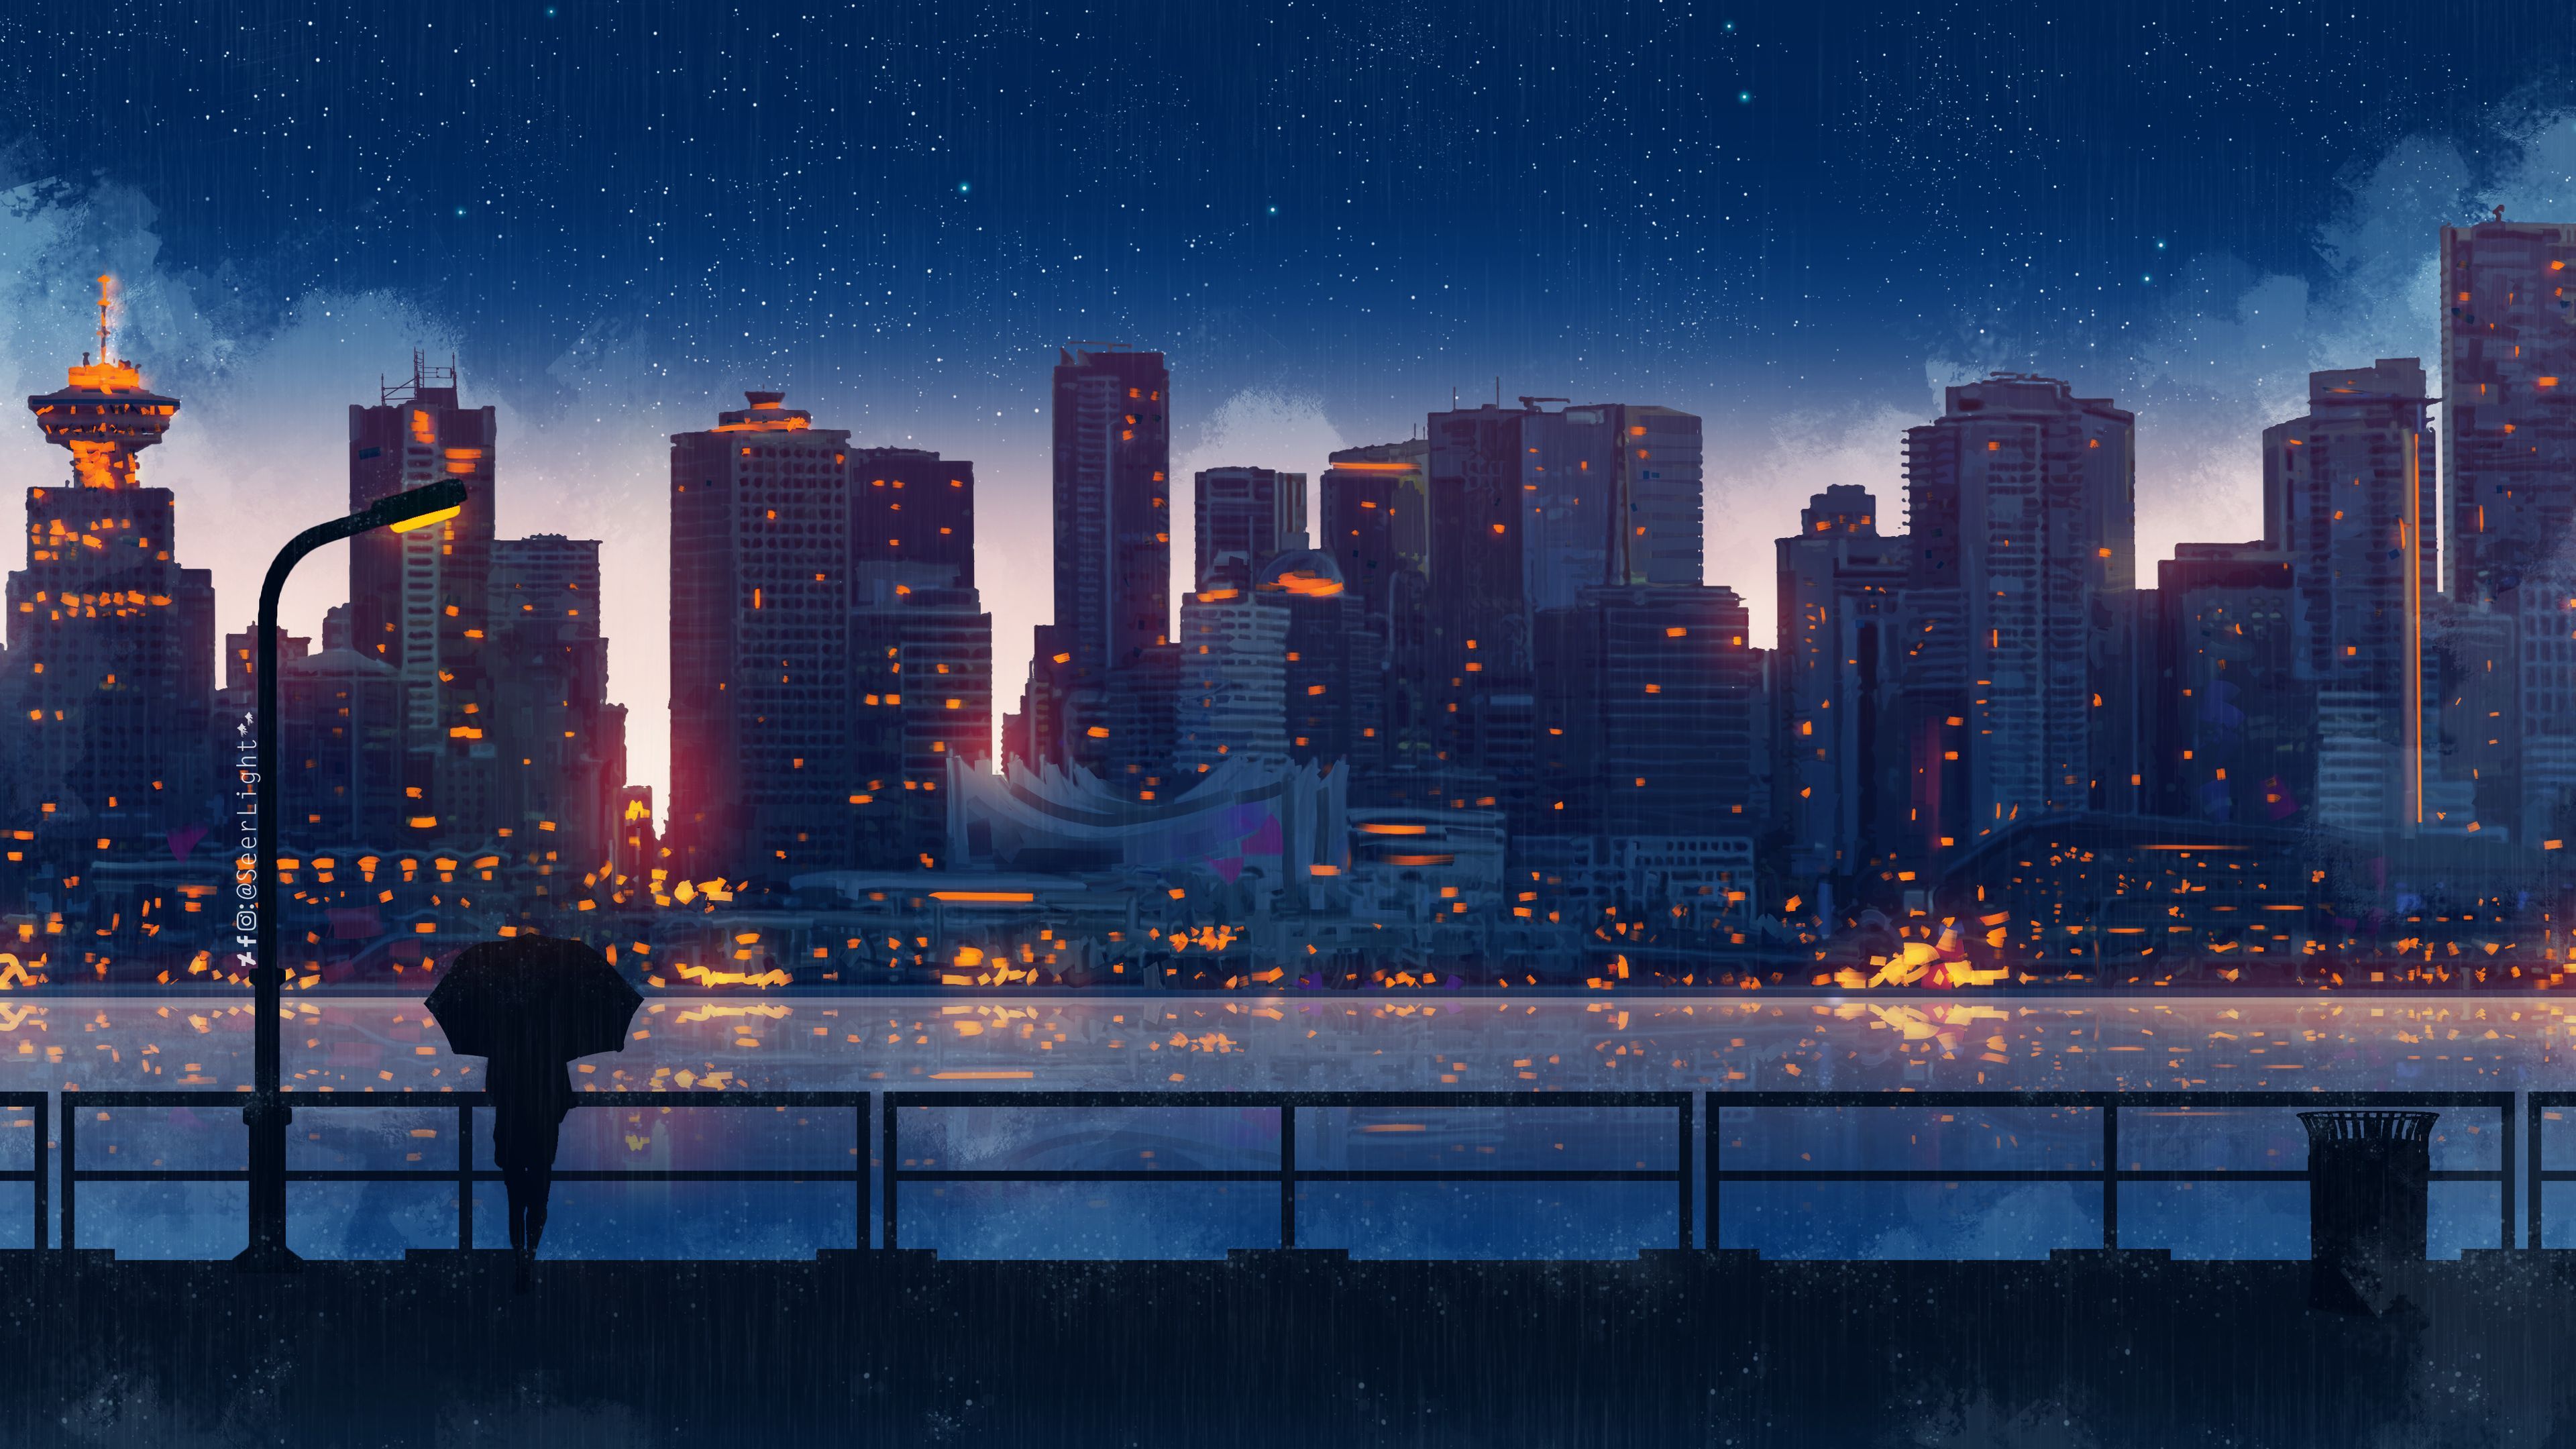 A person standing in front of a city at night - Anime city, rain